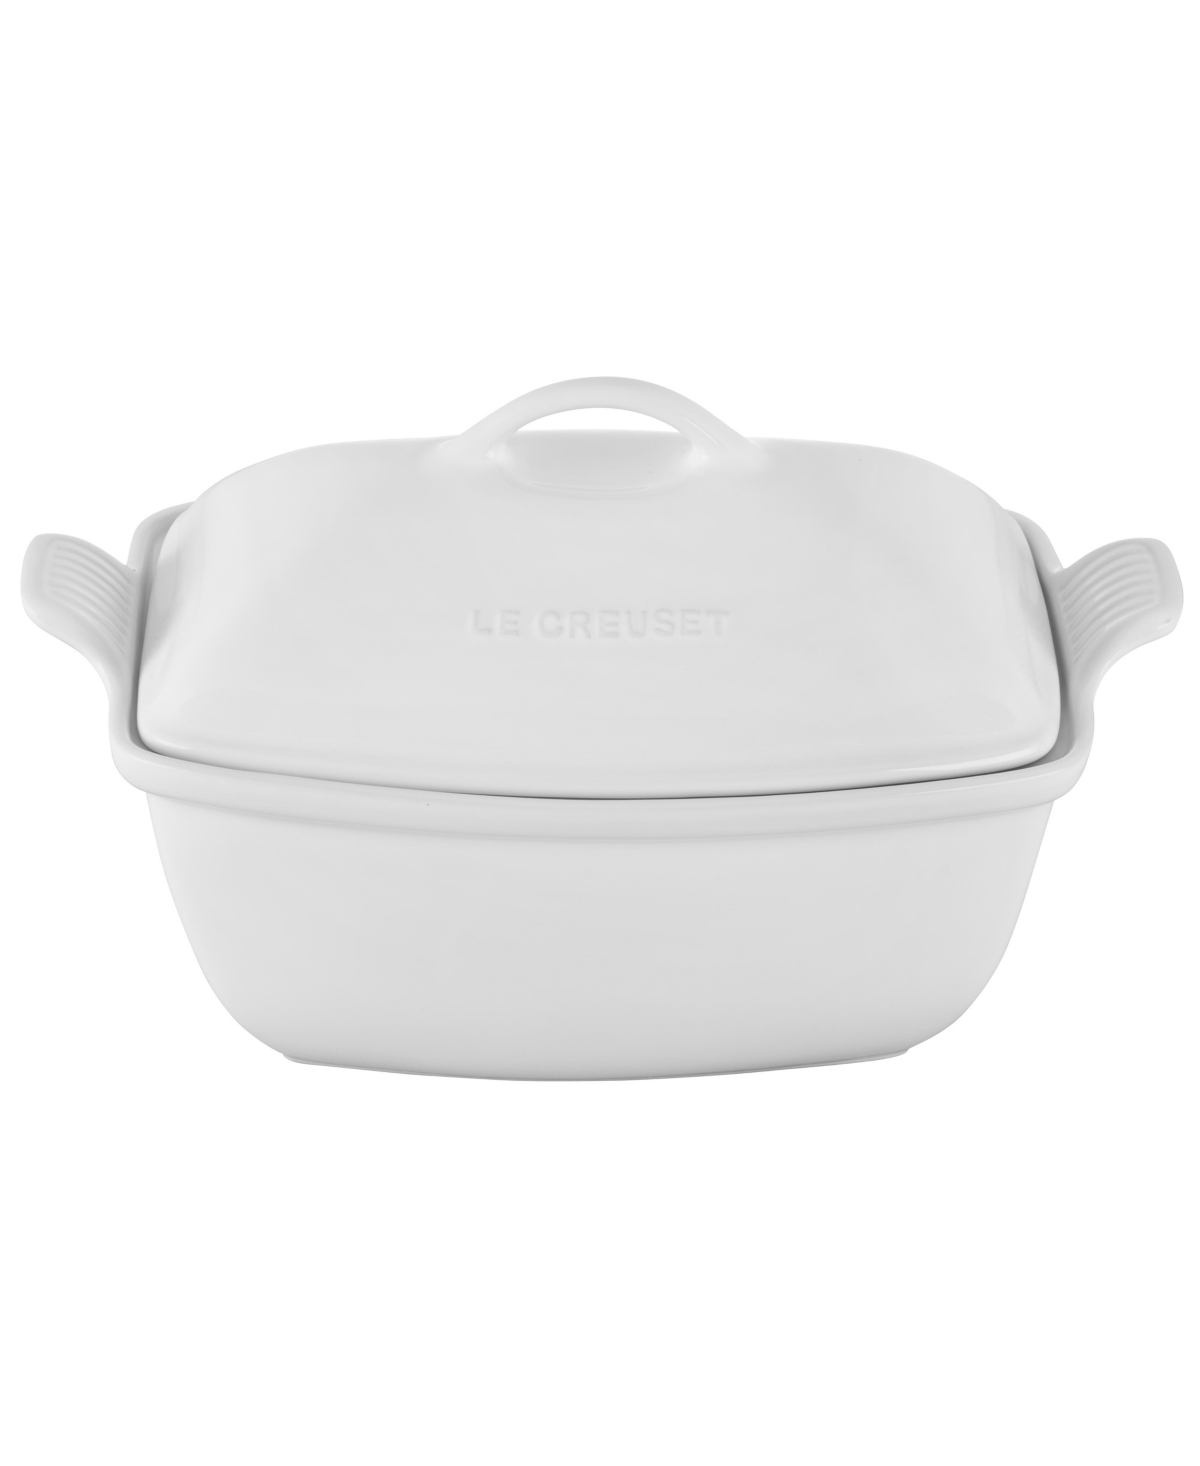 Le Creuset Heritage Stoneware 4.5 Quart Deep Baker With Lid In White